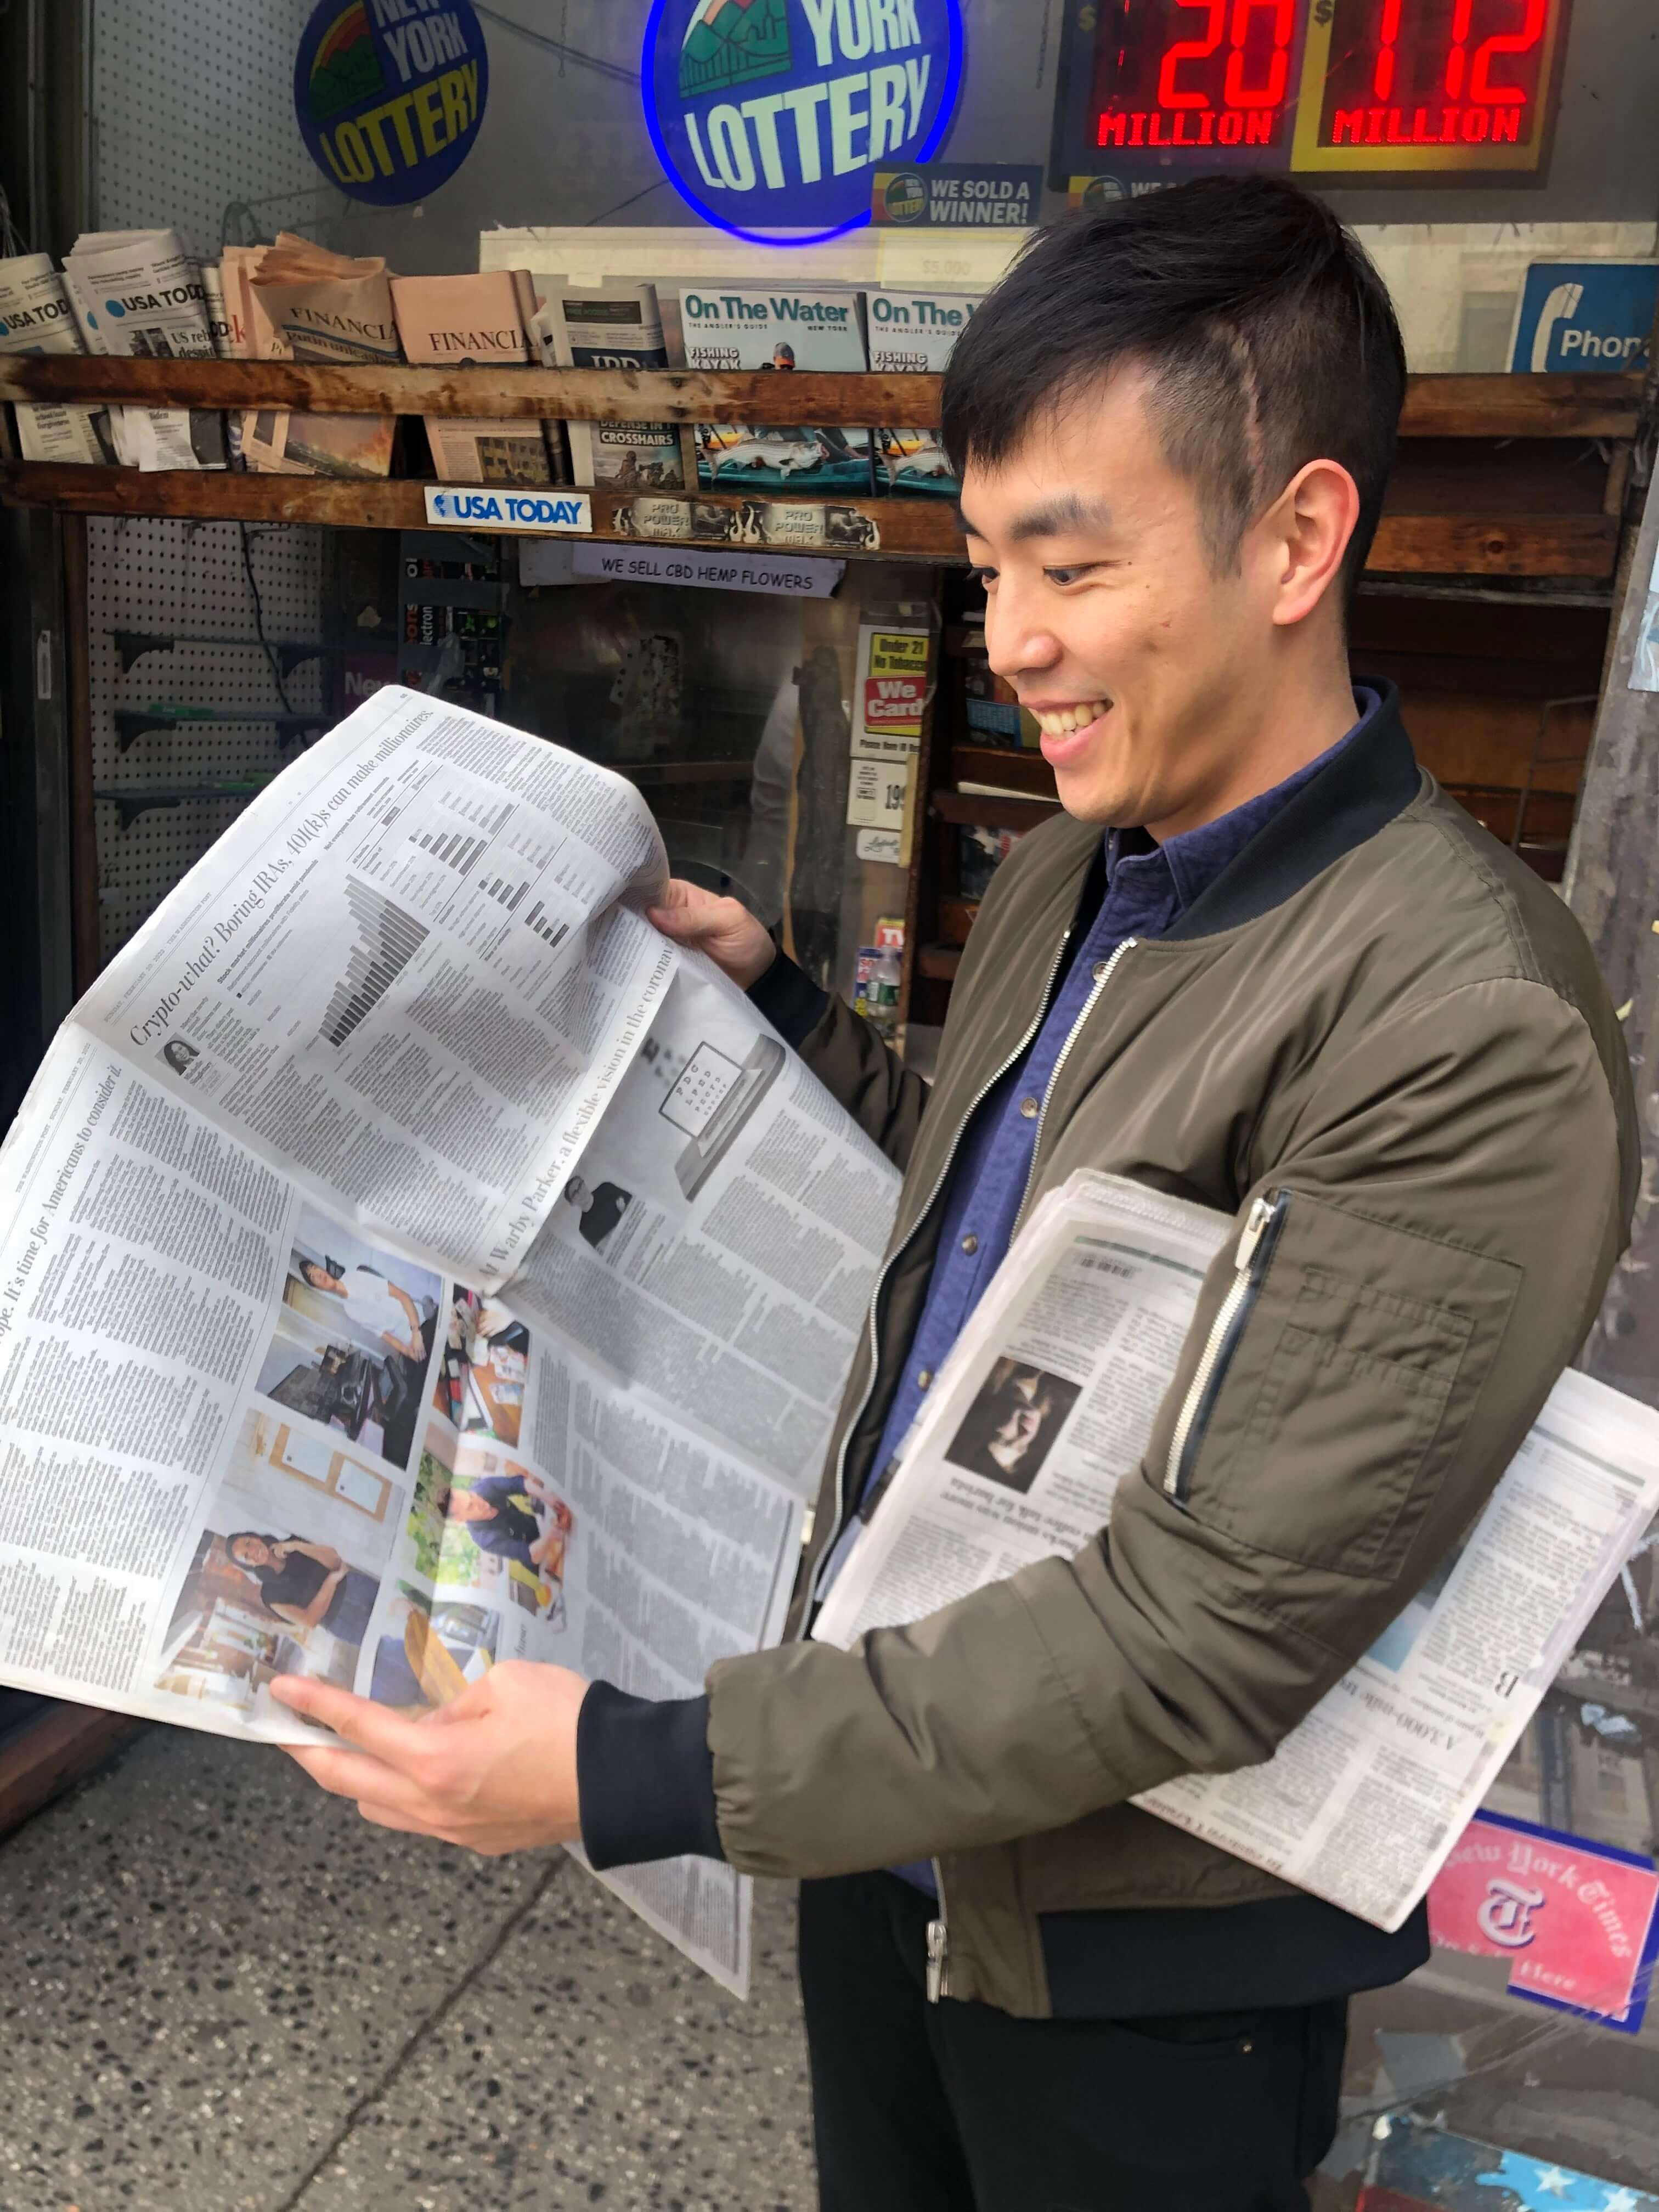 Me holding a newspaper with my face printed on it.